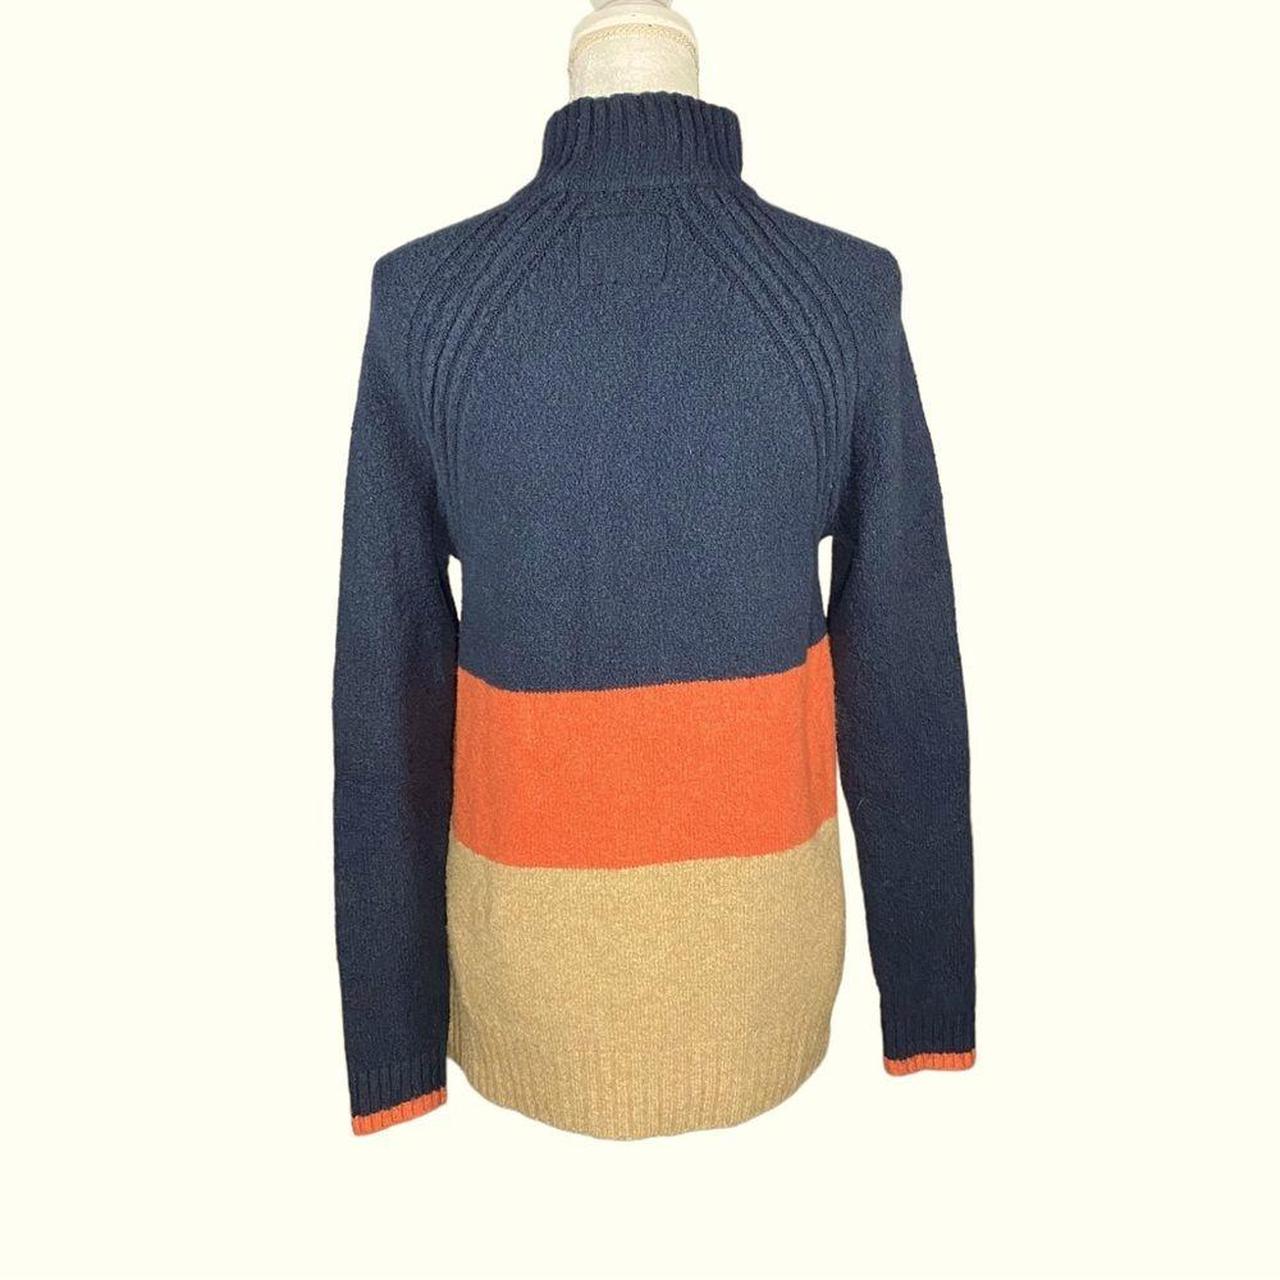 Abercrombie & Fitch Women's Blue and Orange Jumper (3)